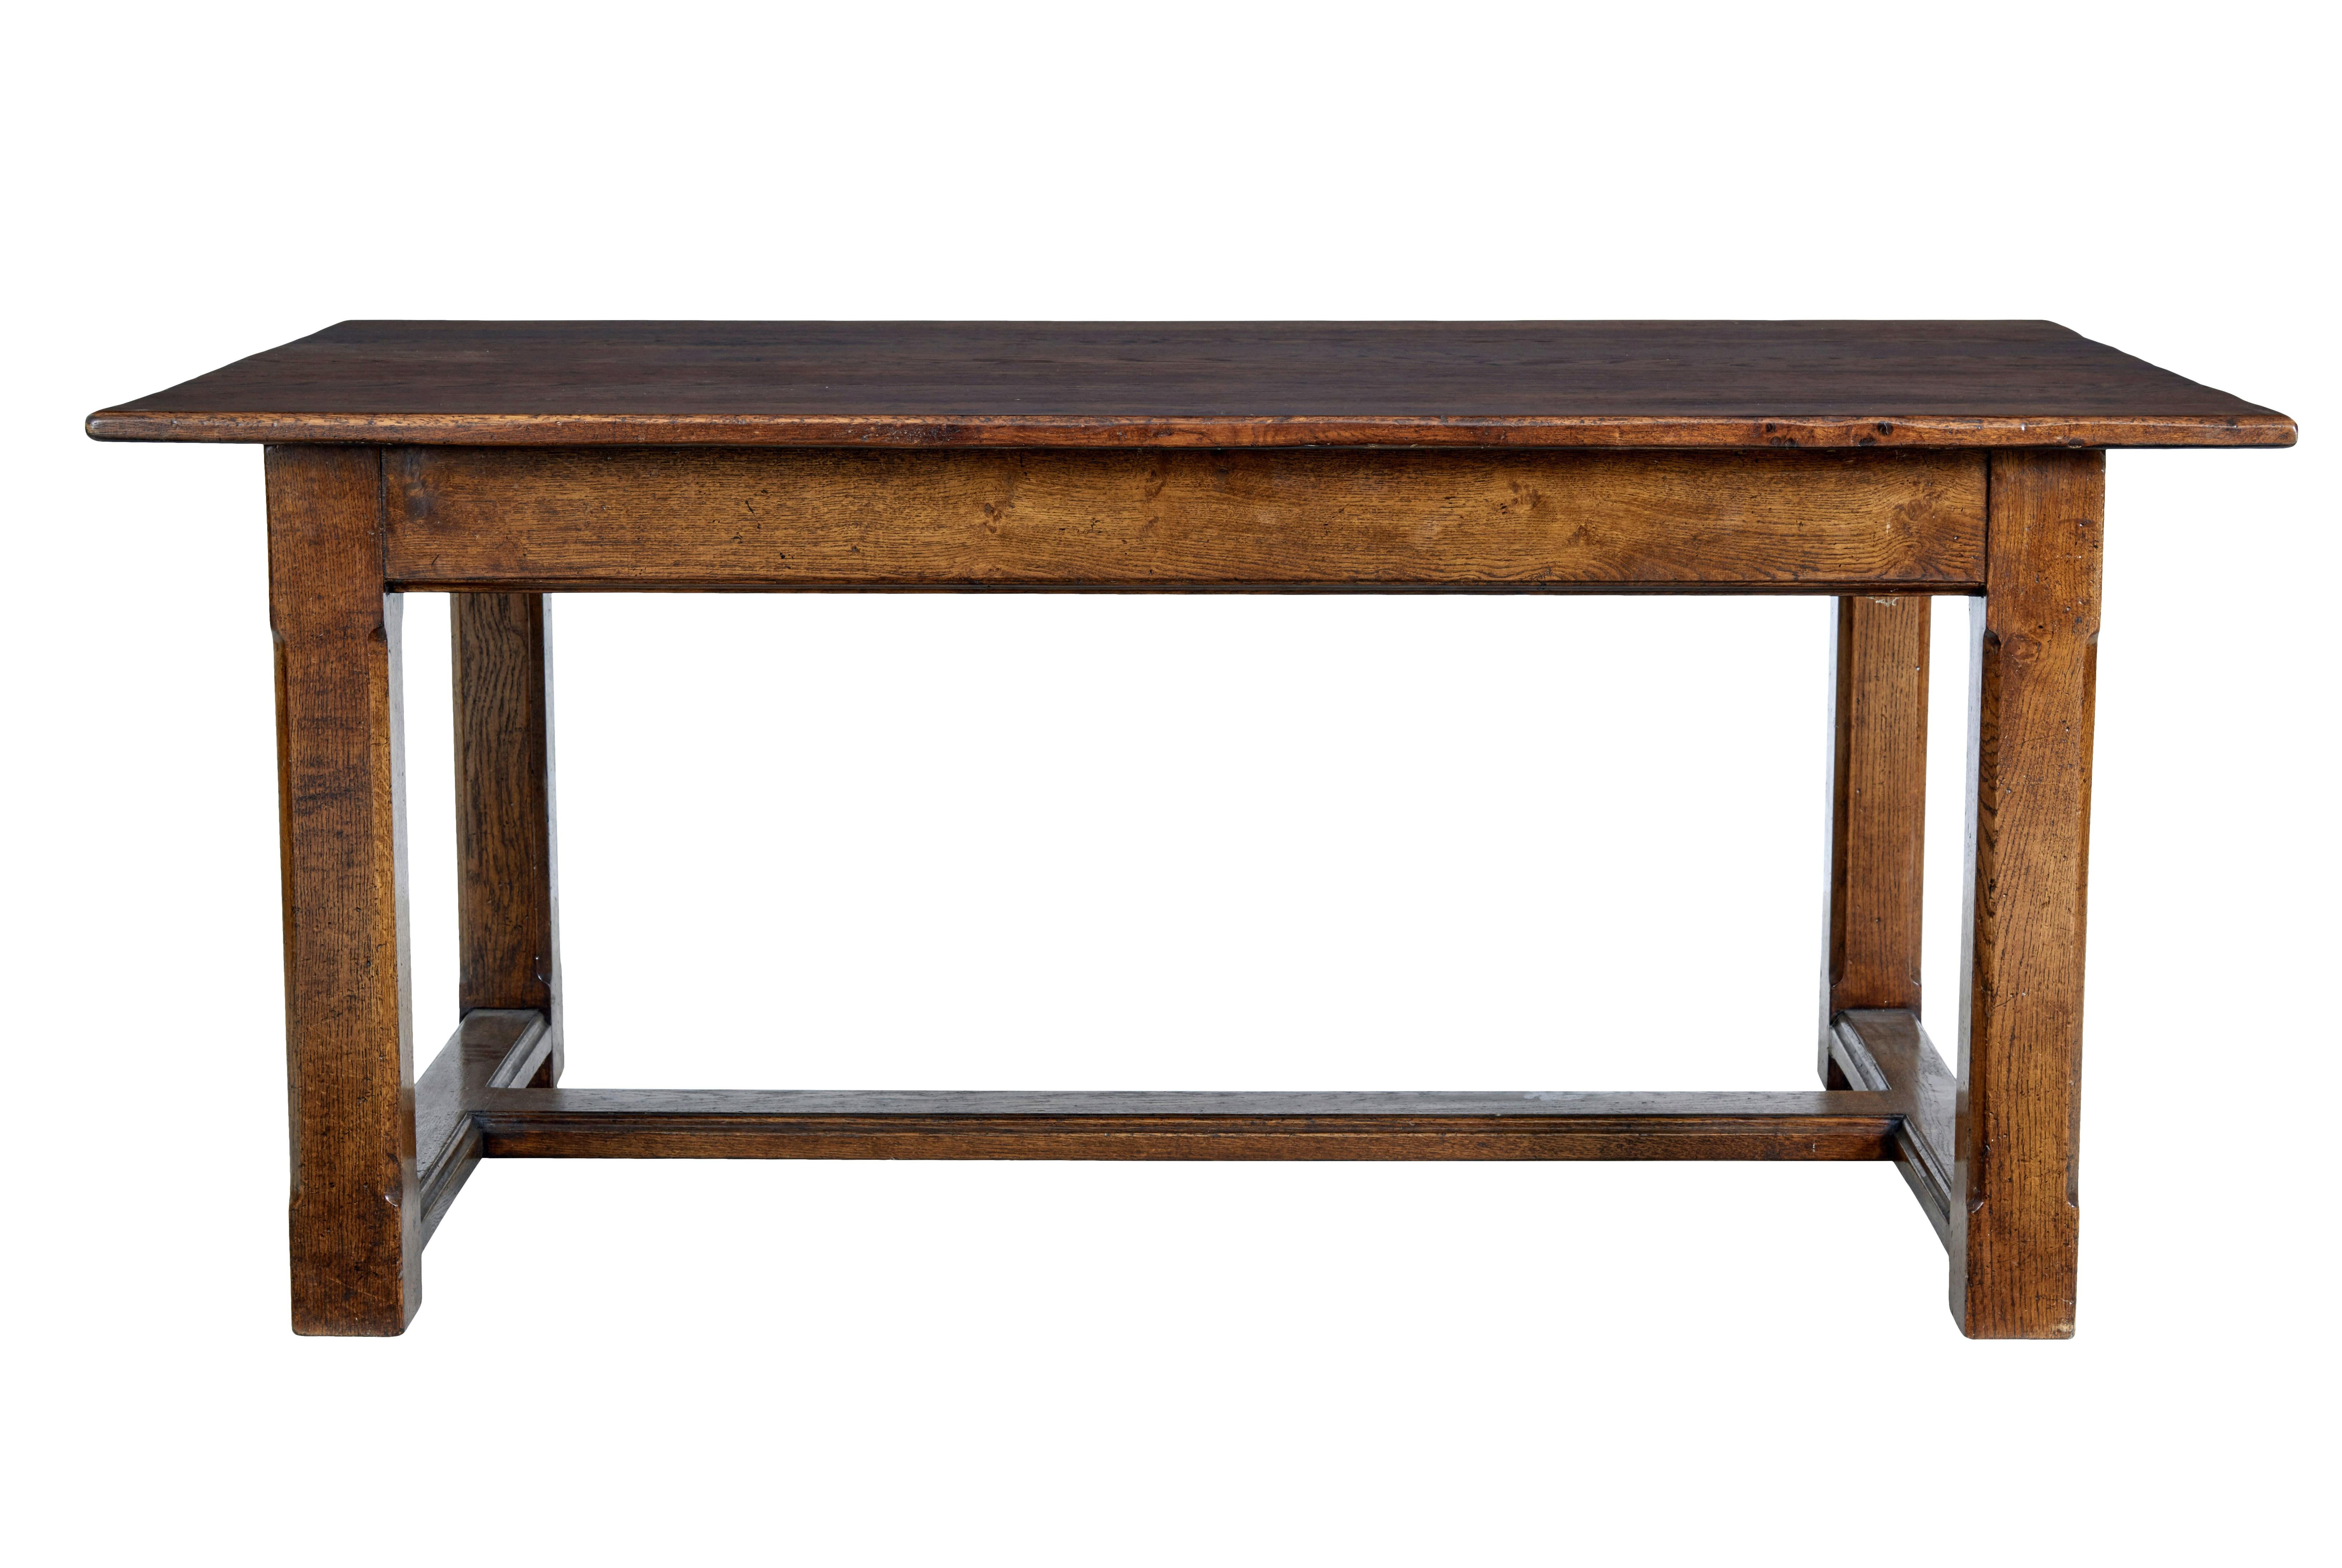 Late 20th century solid oak refectory table circa 1990.

Good quality English made oak refectory table made from seasoned oak.  7 plank oak top, standing on a straight leg base with fluted detail, united by h frame stretcher.

Very good size for